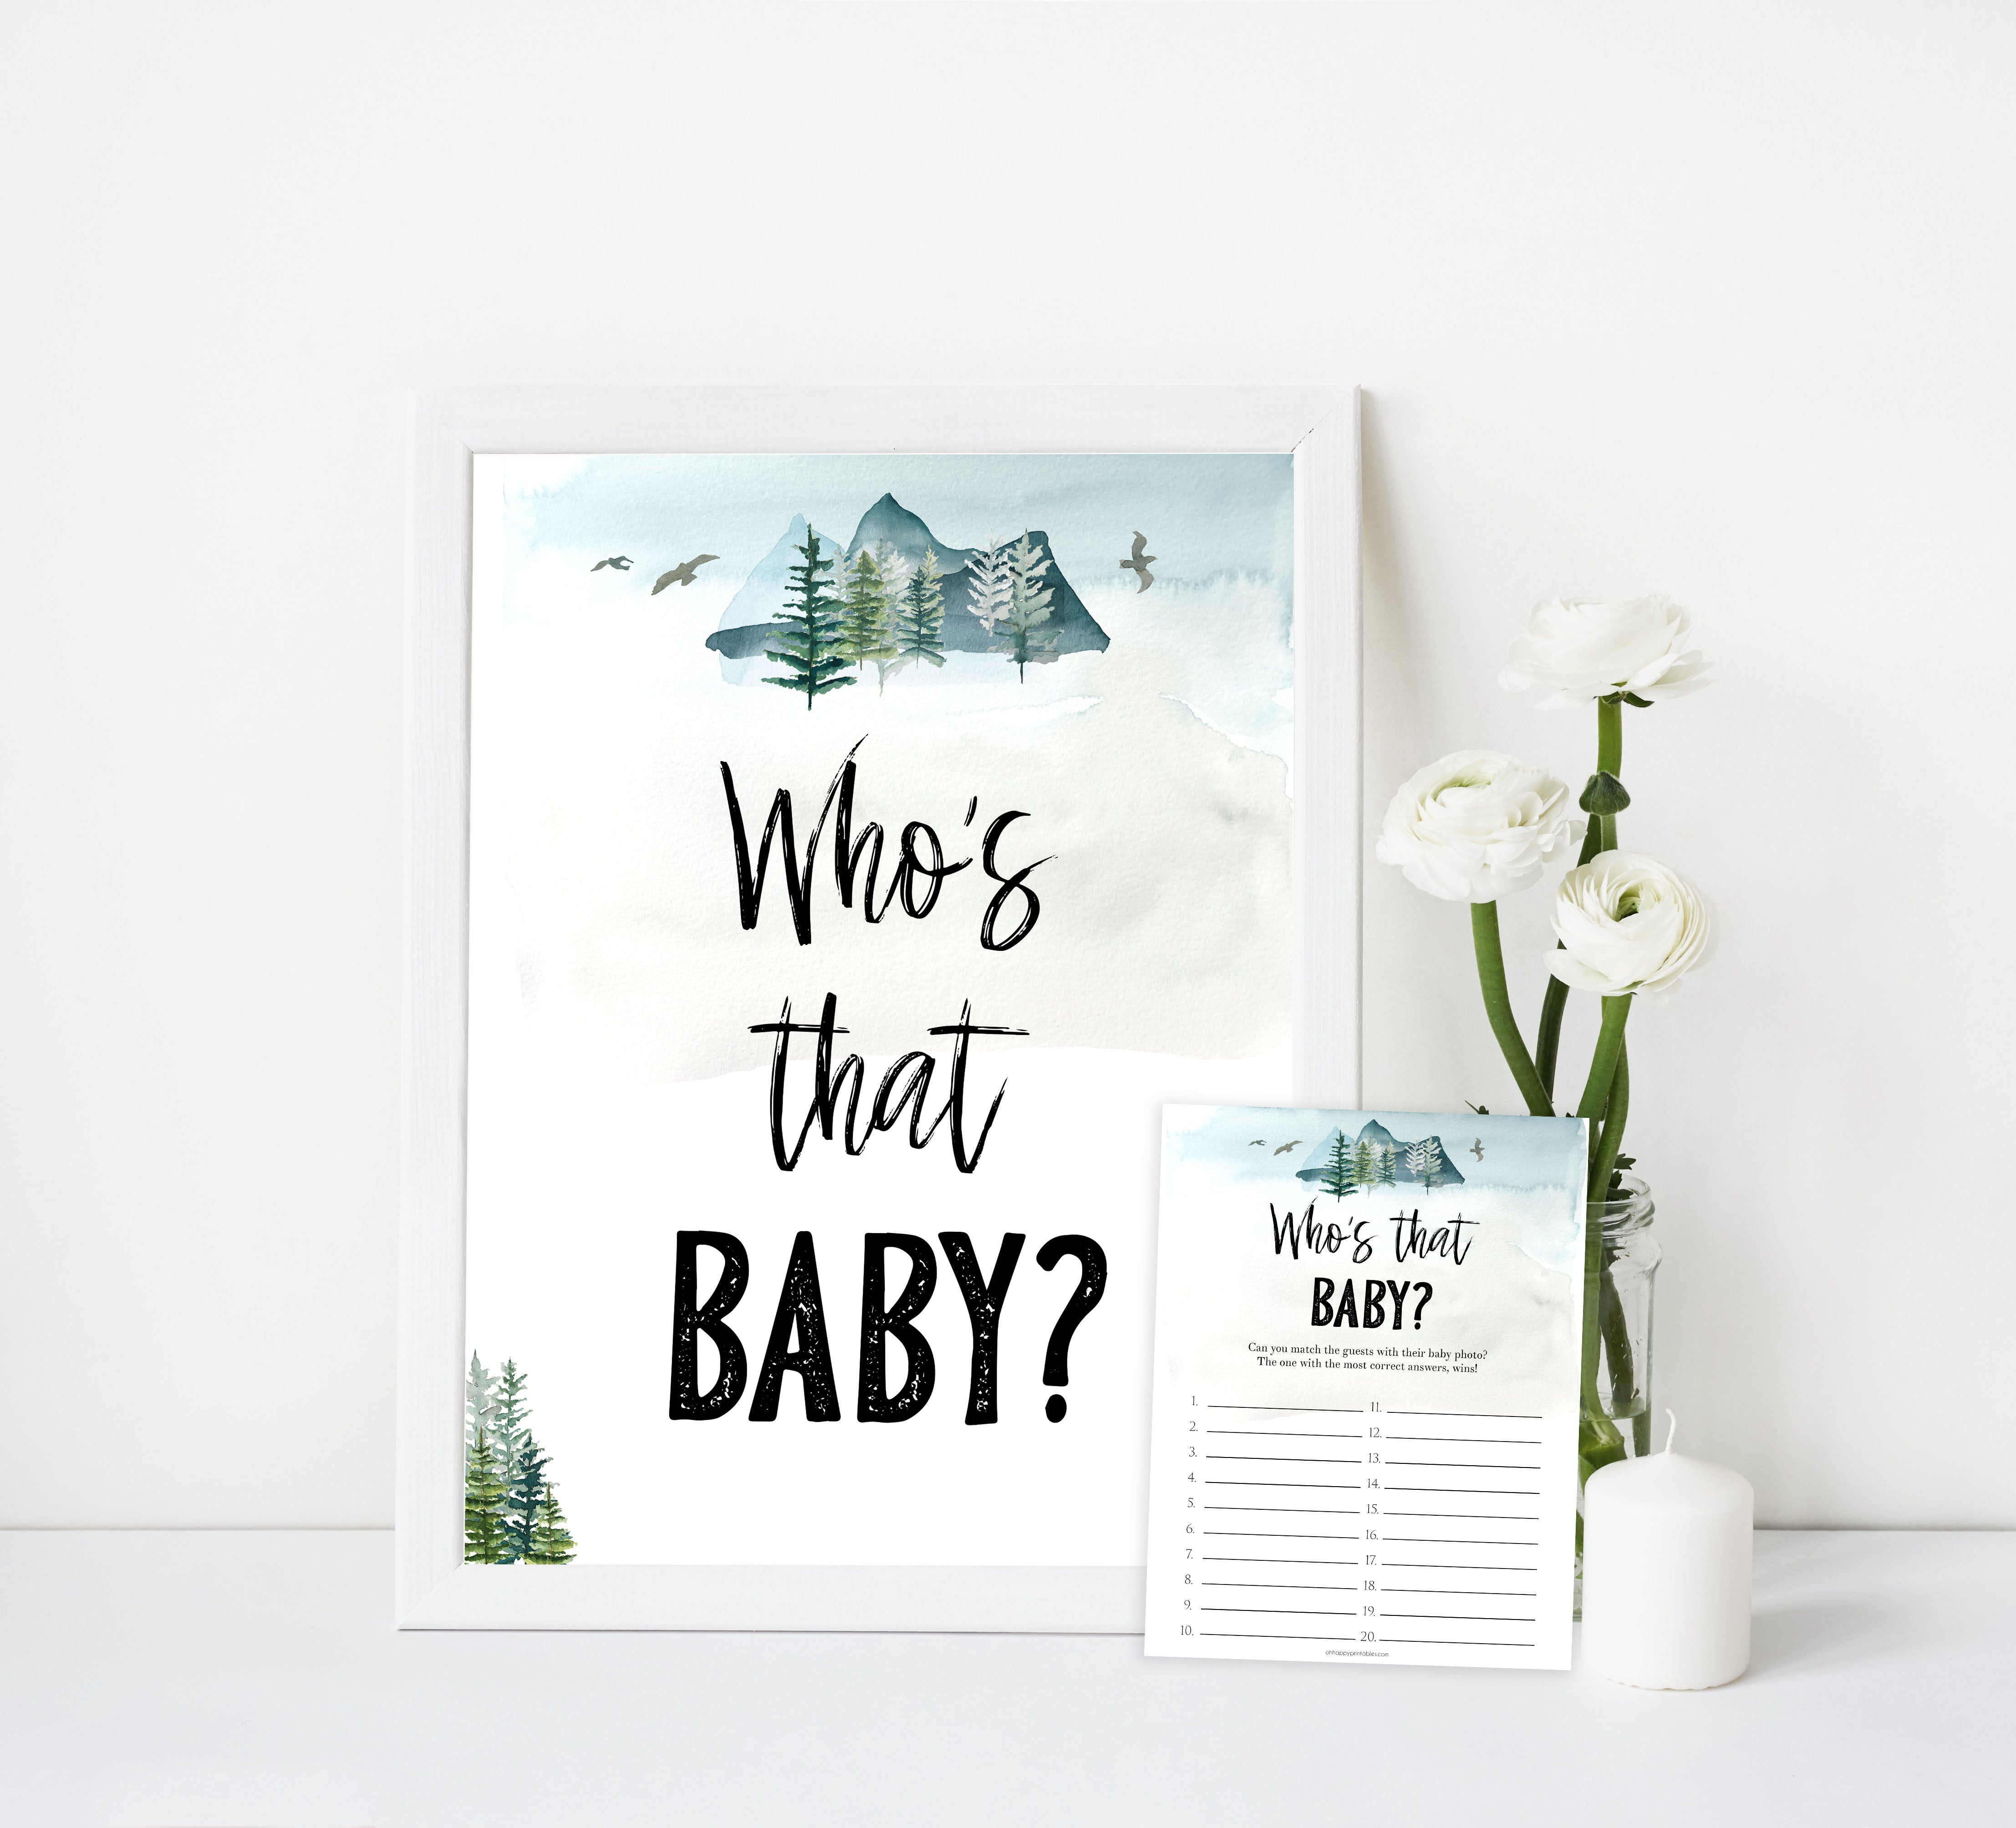 whos that baby game, Printable baby shower games, adventure awaits baby games, baby shower games, fun baby shower ideas, top baby shower ideas, adventure awaits baby shower, baby shower games, fun adventure baby shower ideas